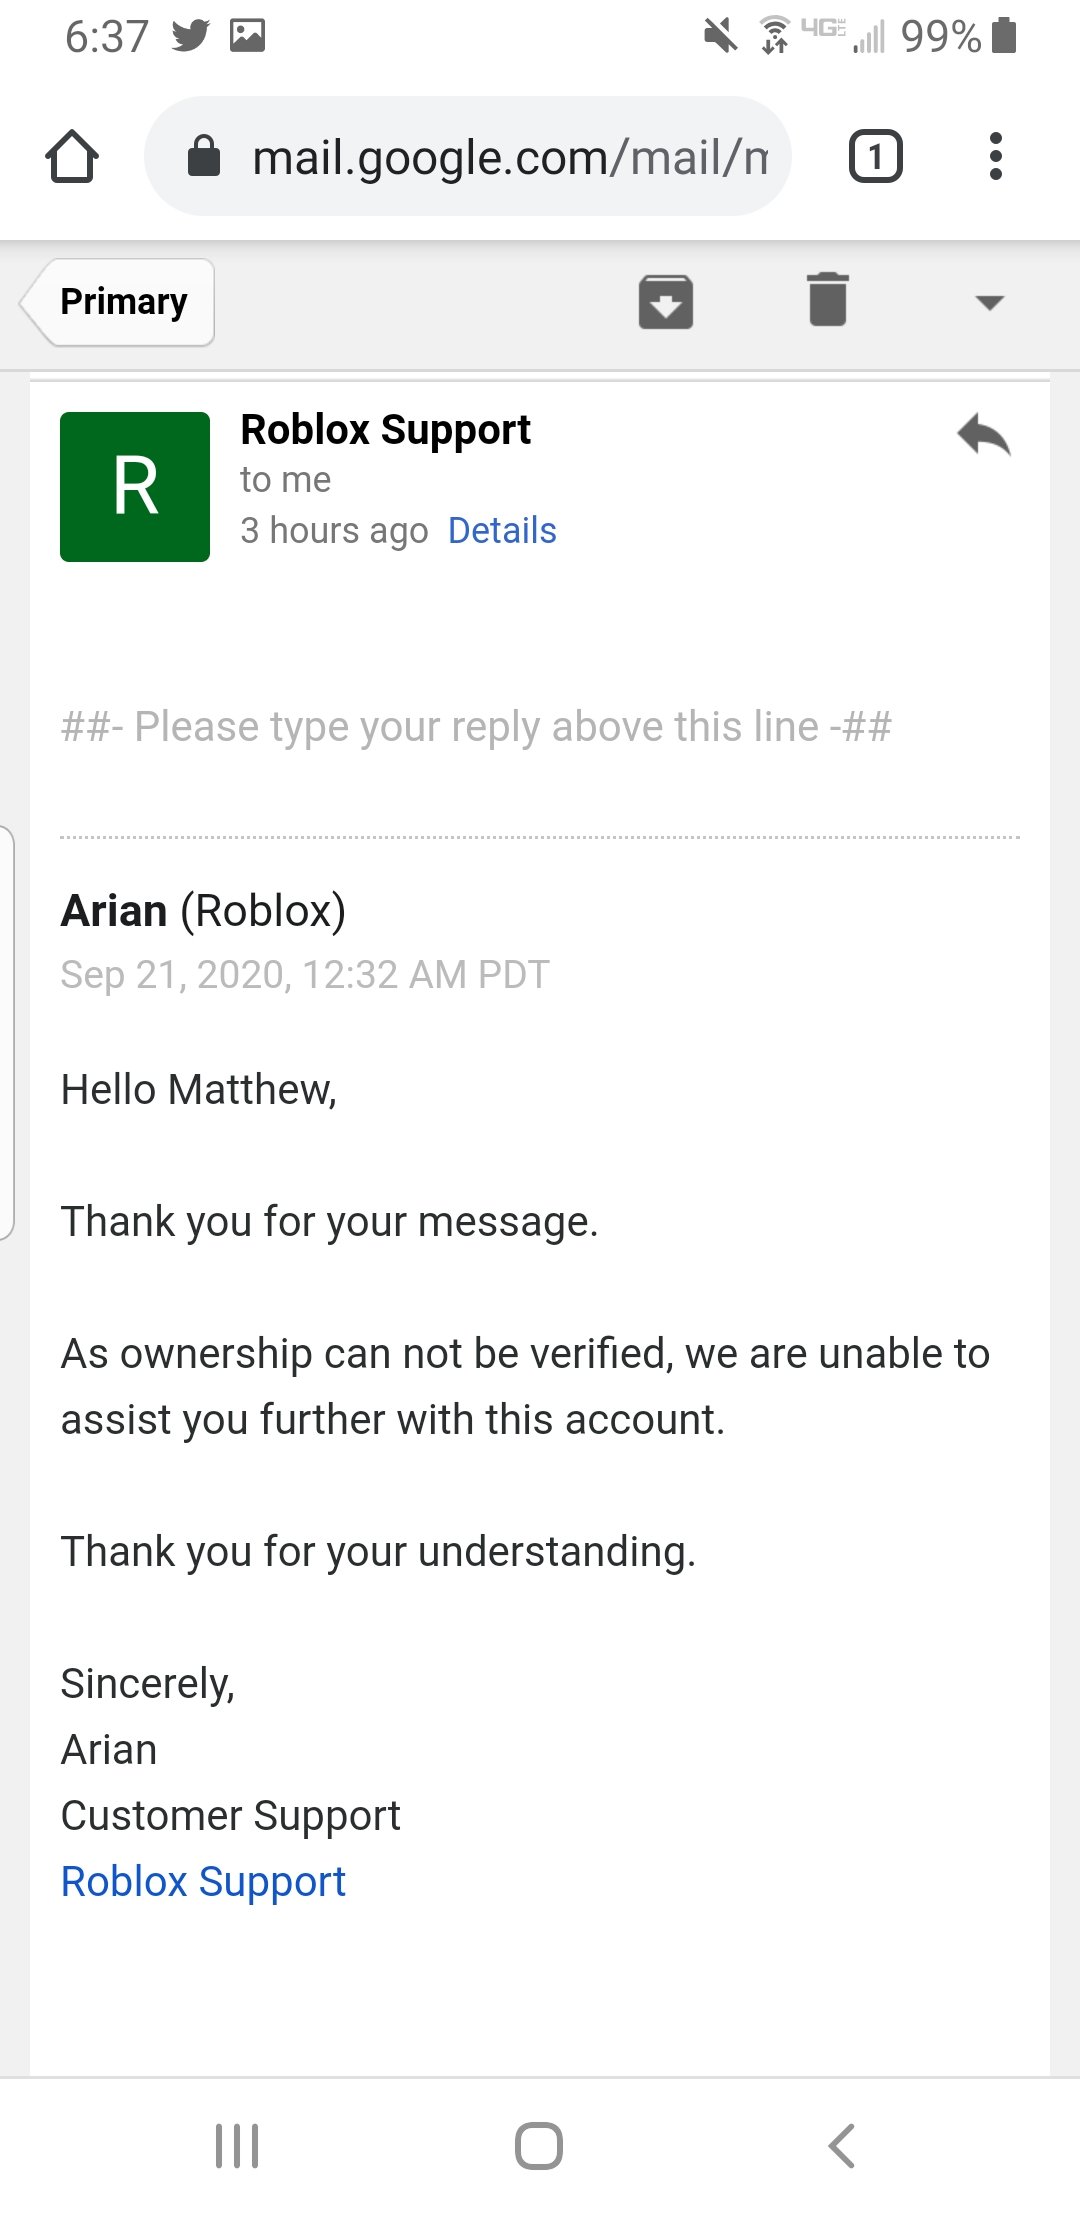 How to verify my ownership of a Roblox account to delete it? The Roblox  support team is not helping and I have no need to buy Robux on that account  and I